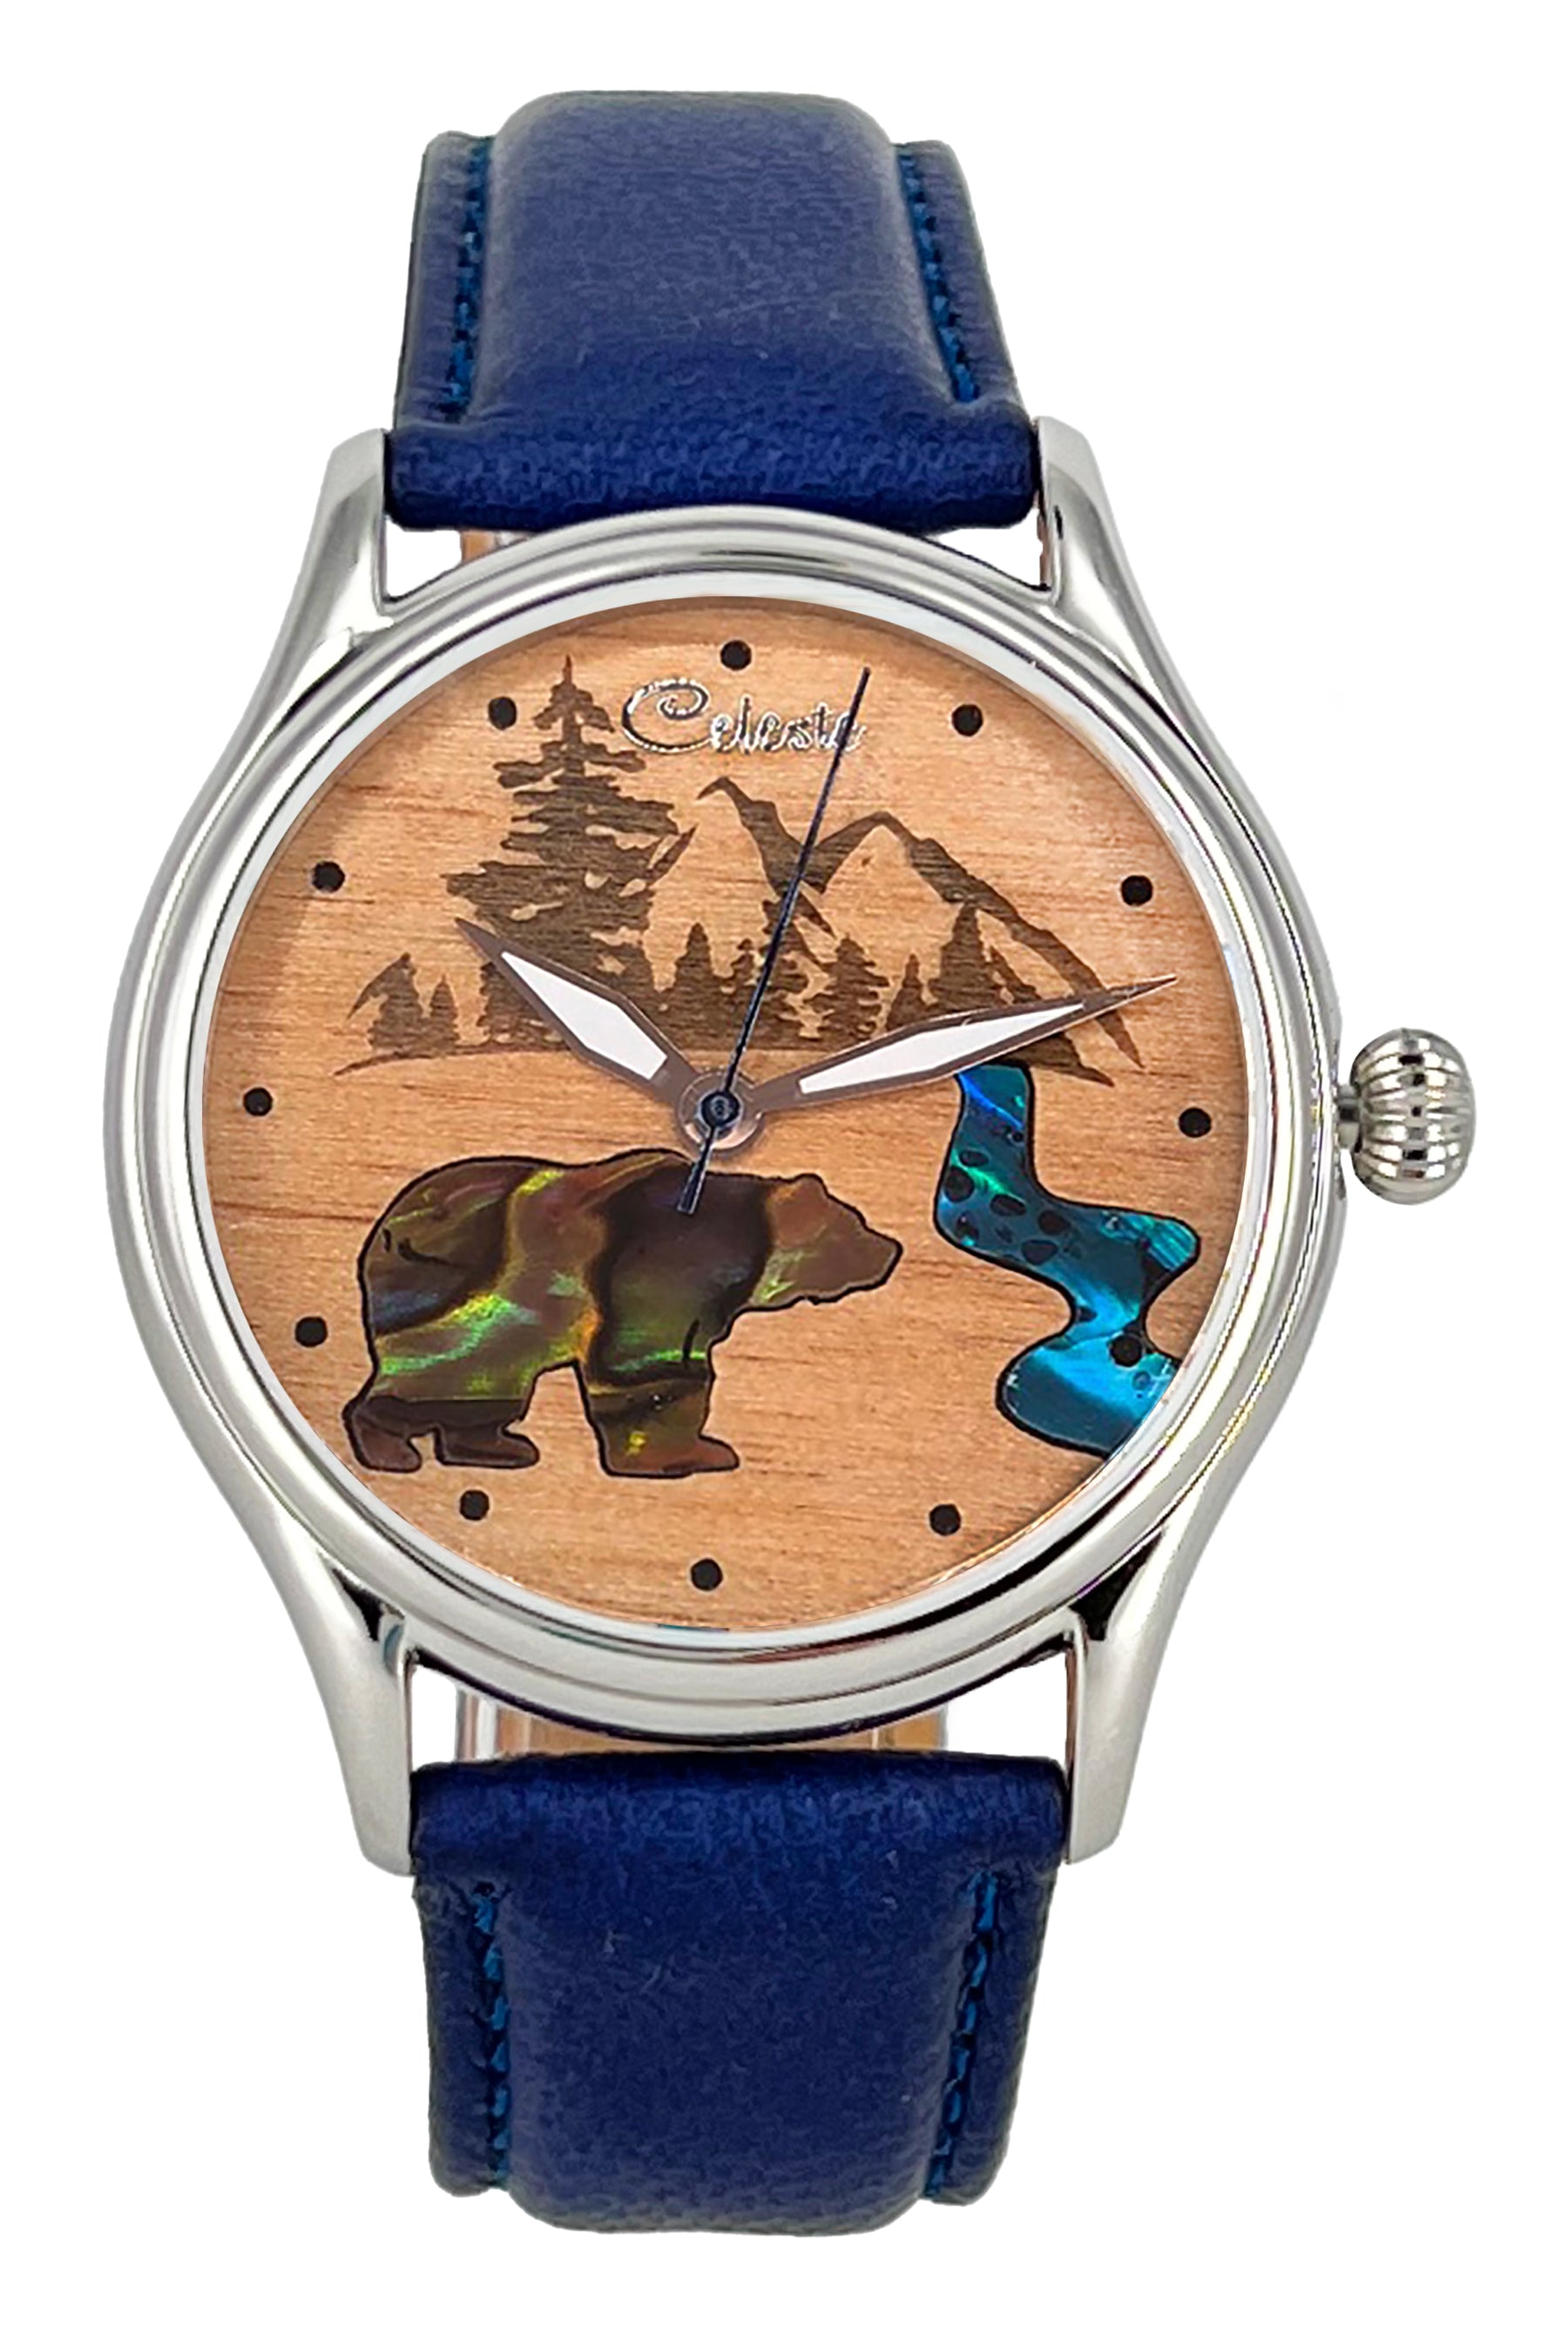 Wood Watch Faces